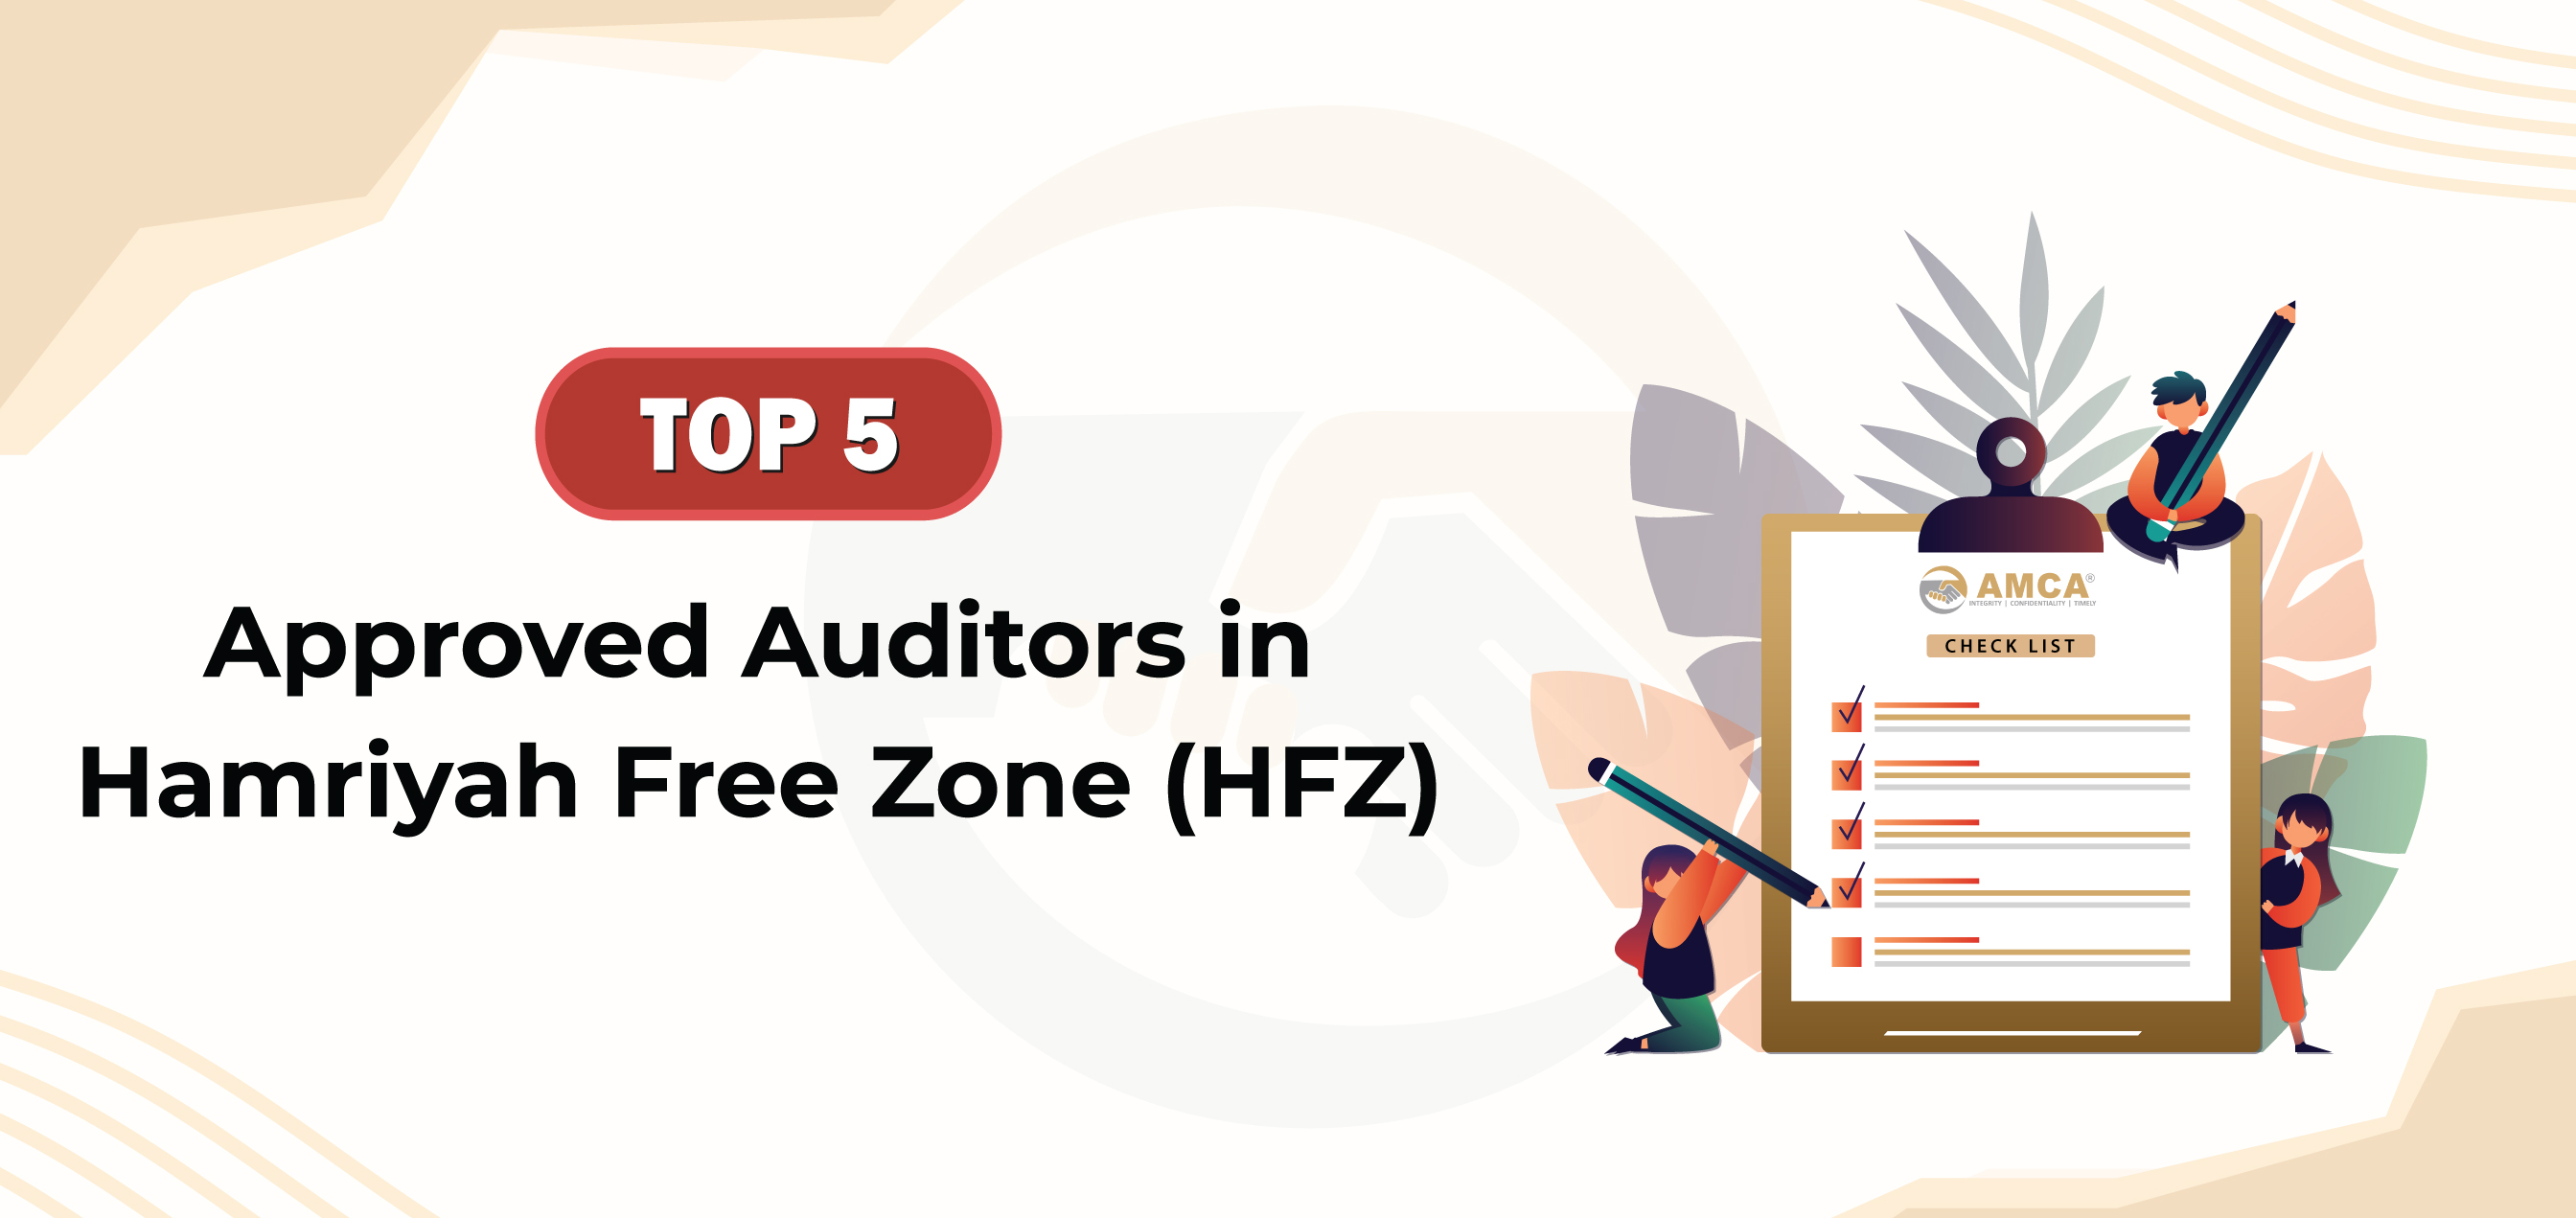 Top 5 Approved Auditors in Hamriyah Free Zone (HFZ)